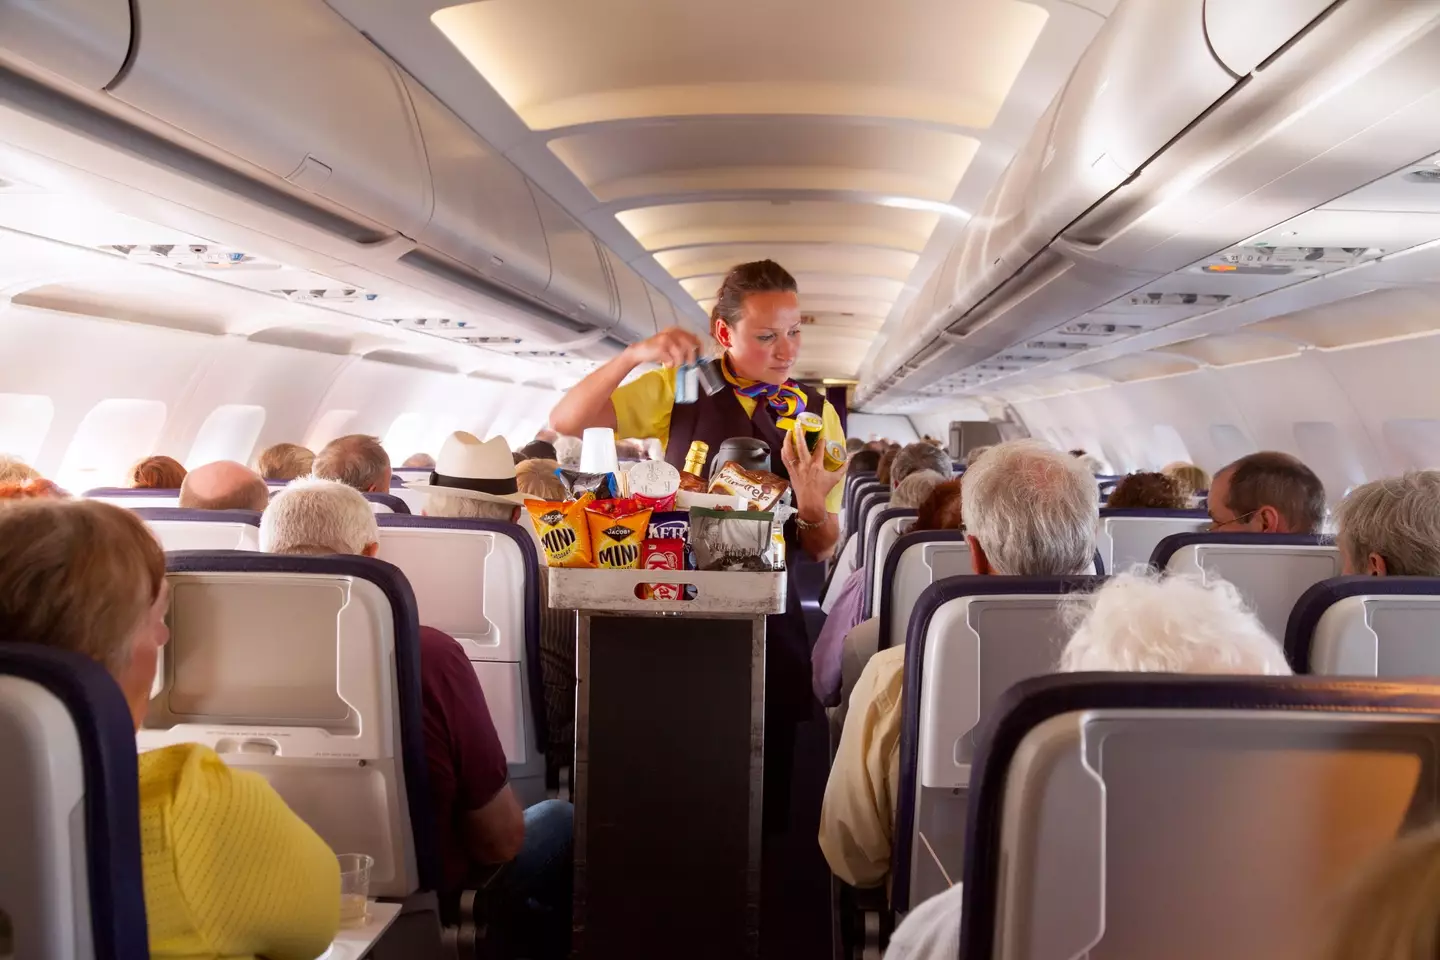 A flight attendant has revealed just how dirty planes can be.